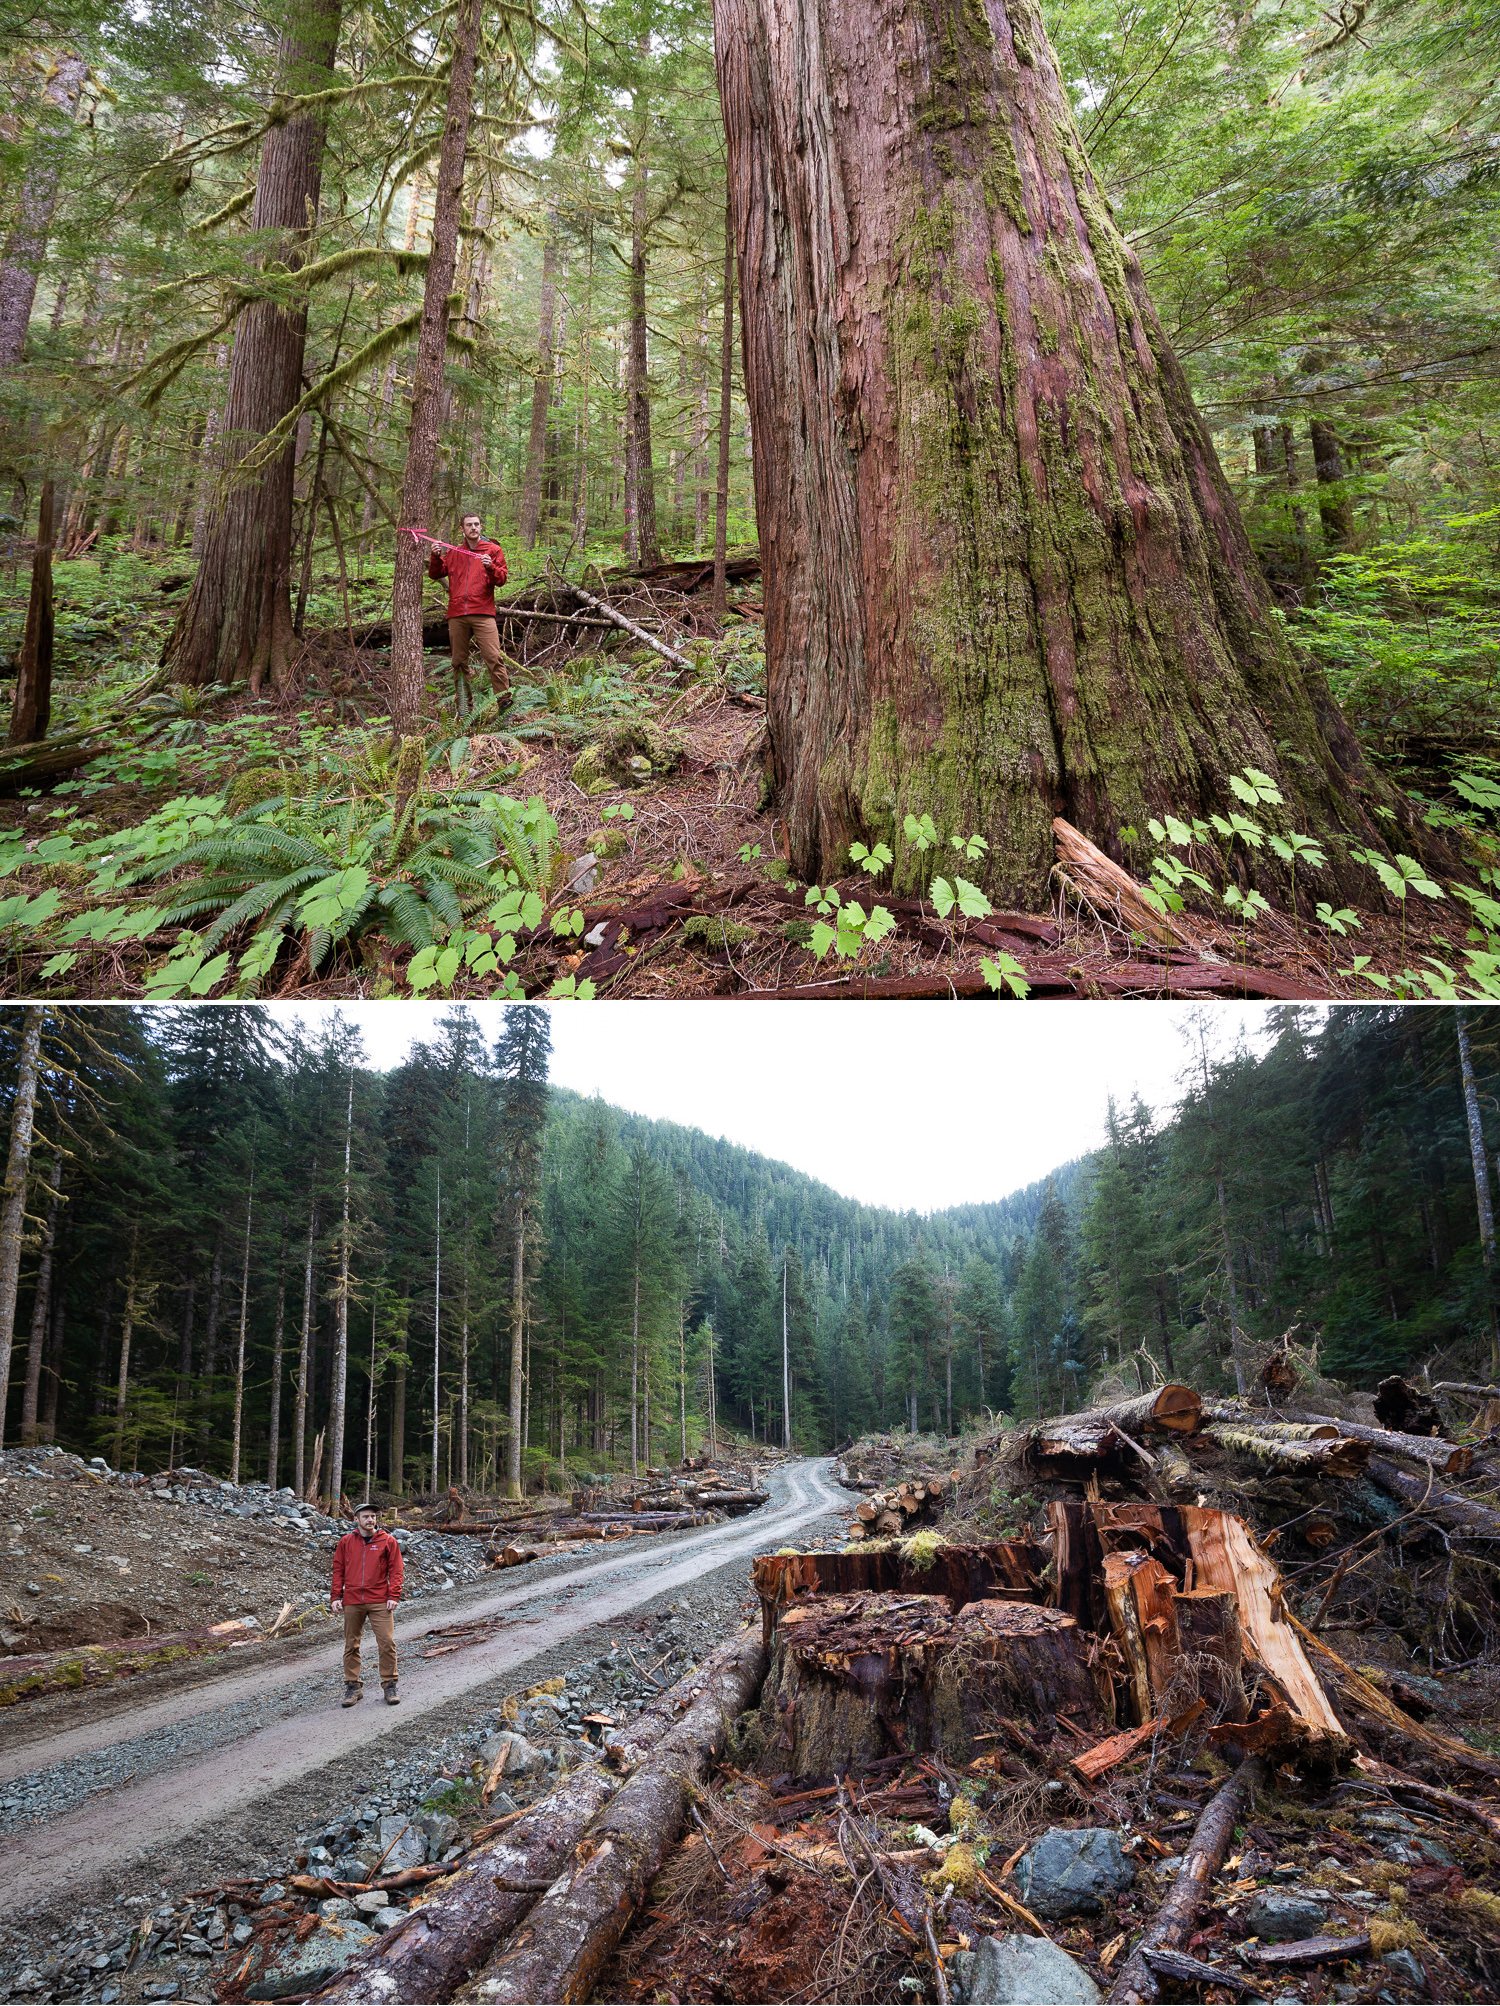 Before and after photos of old-growth trees cut down by logging by photographer TJ Watt